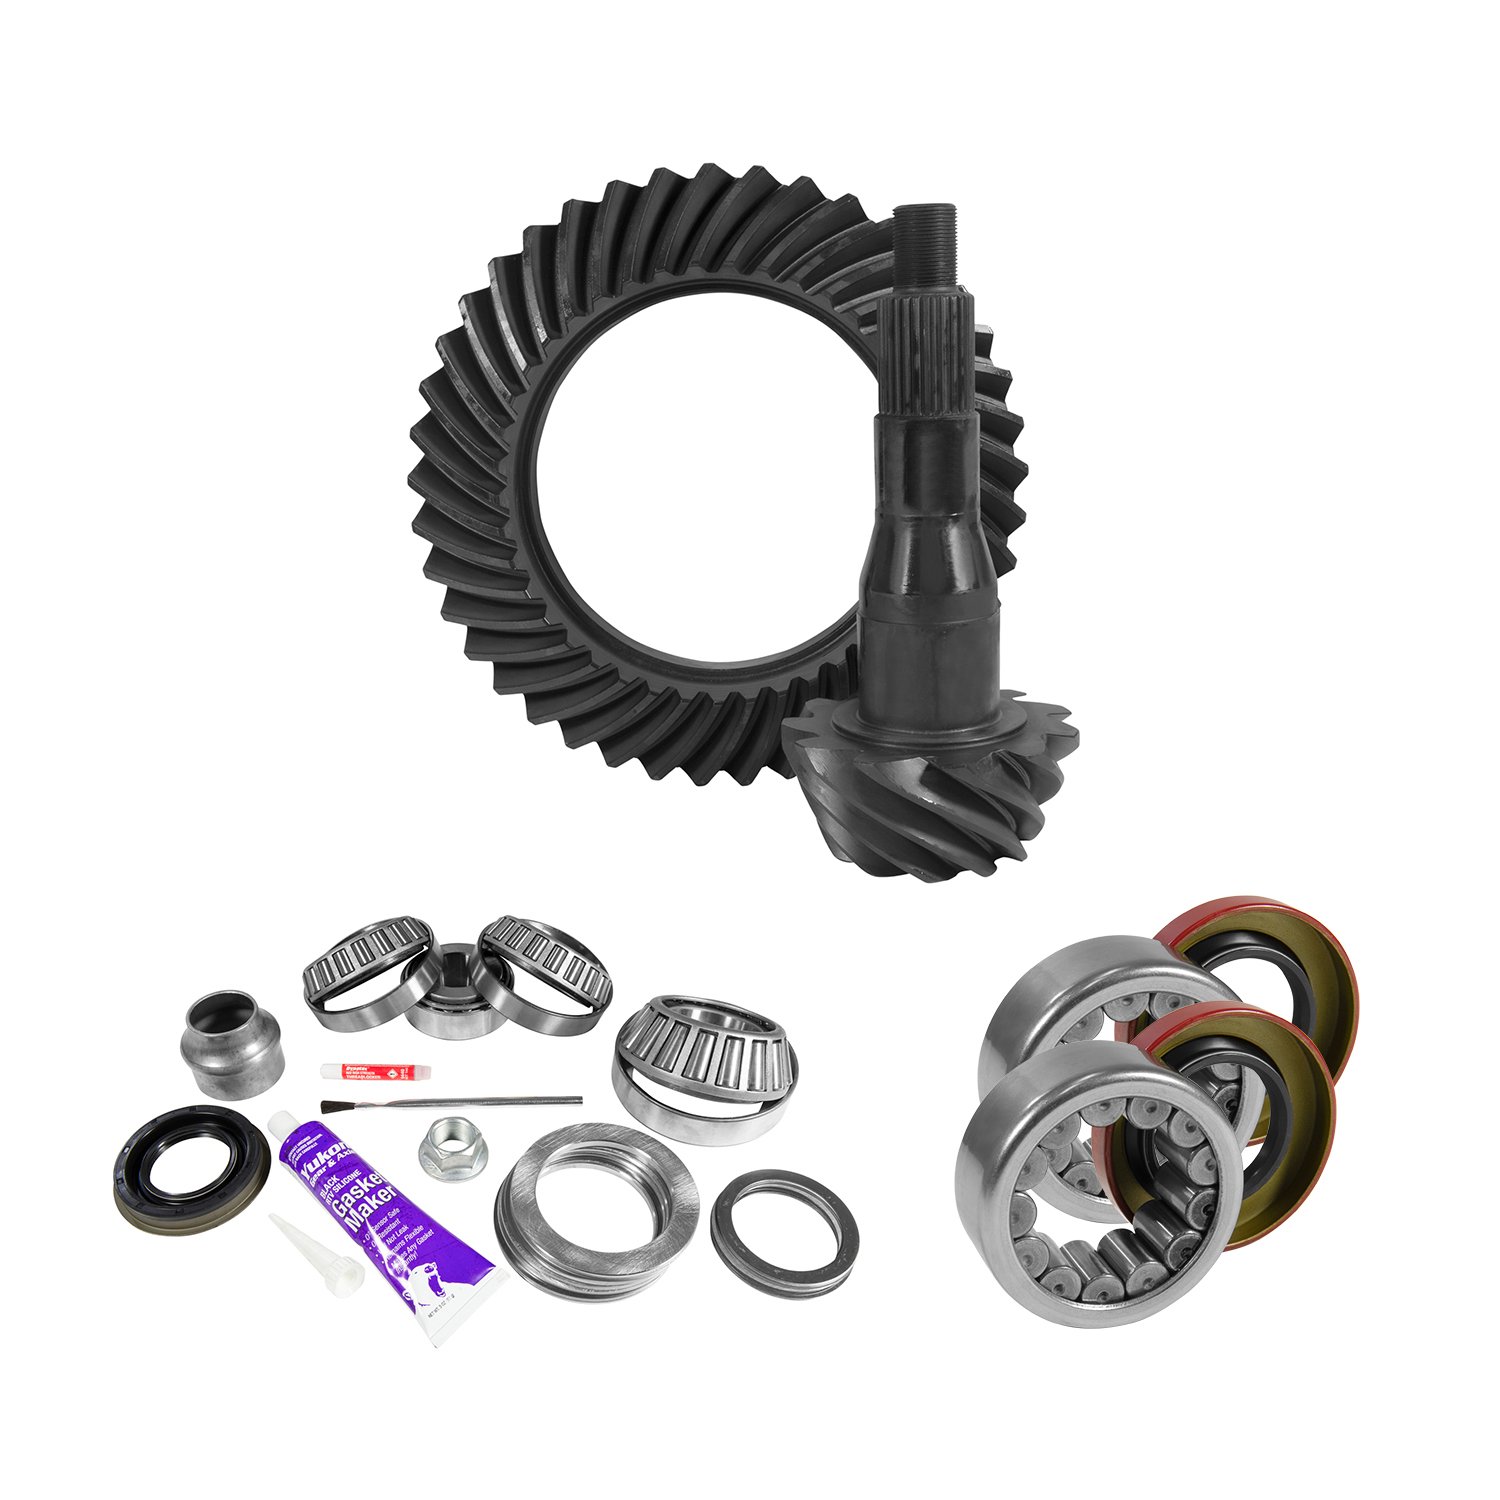 USA Standard 10815 9.75 in. Ford 4.11 Rear Ring & Pinion Install Kit, Axle Bearings & Seal